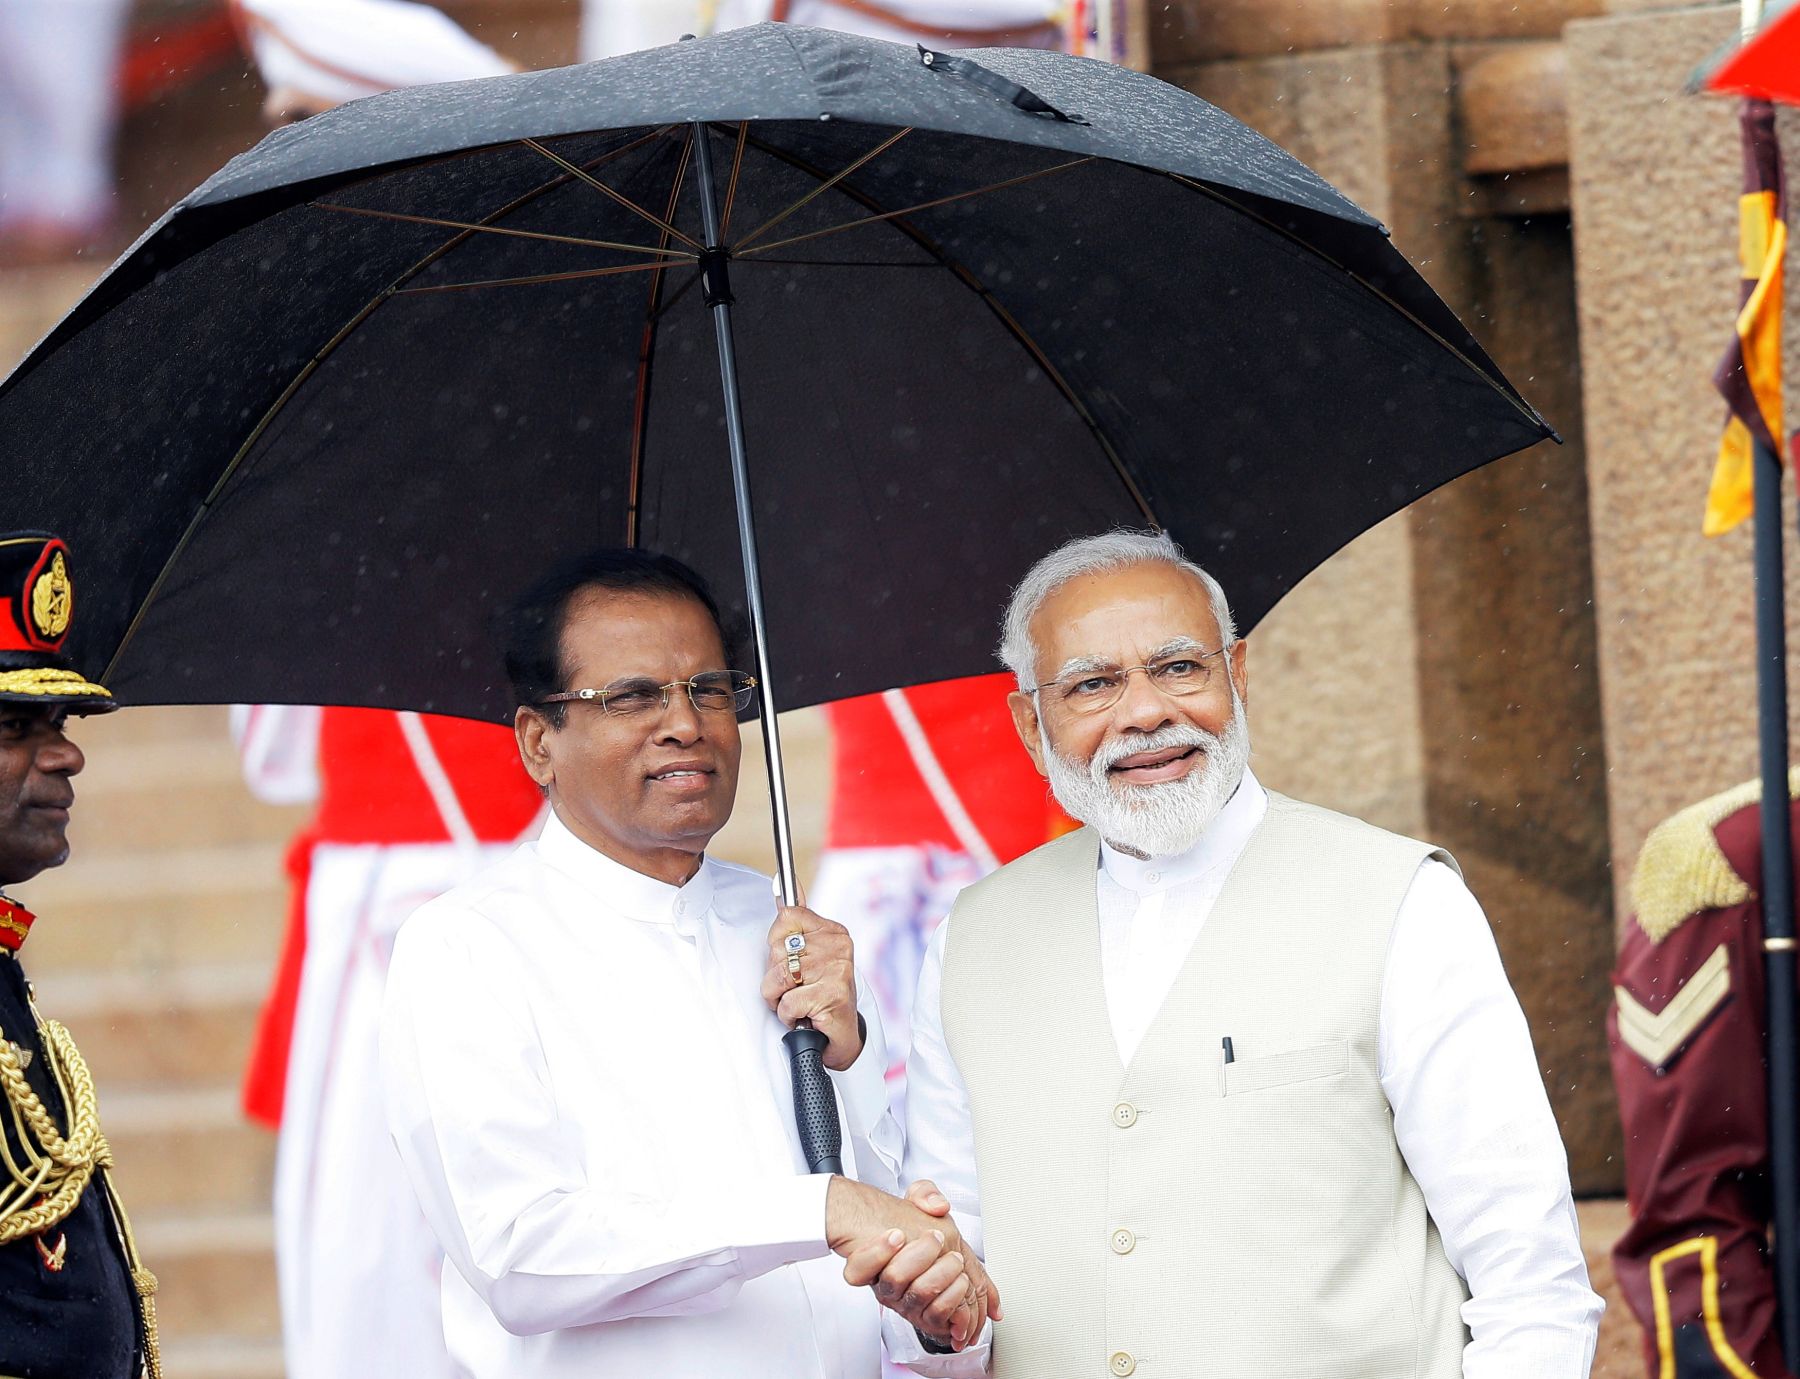 India's Prime Minister Narendra Modi shakes hands with Sri Lanka's  President Maithripala Sirisena during his welcome ceremony at the  Presidential Secretariat in Colombo